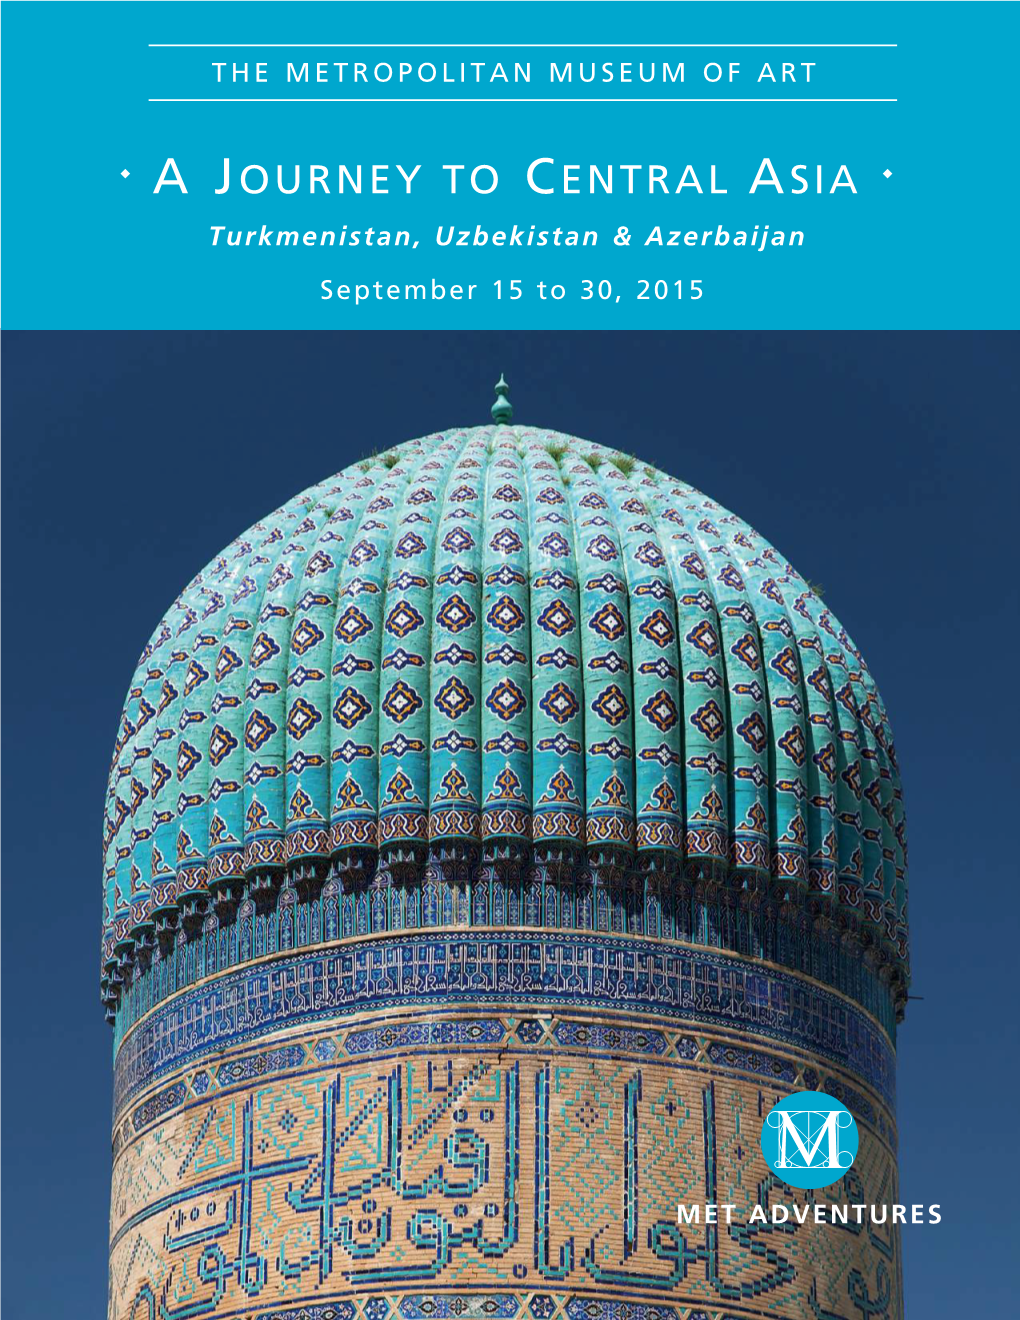 A Journey to Central Asia